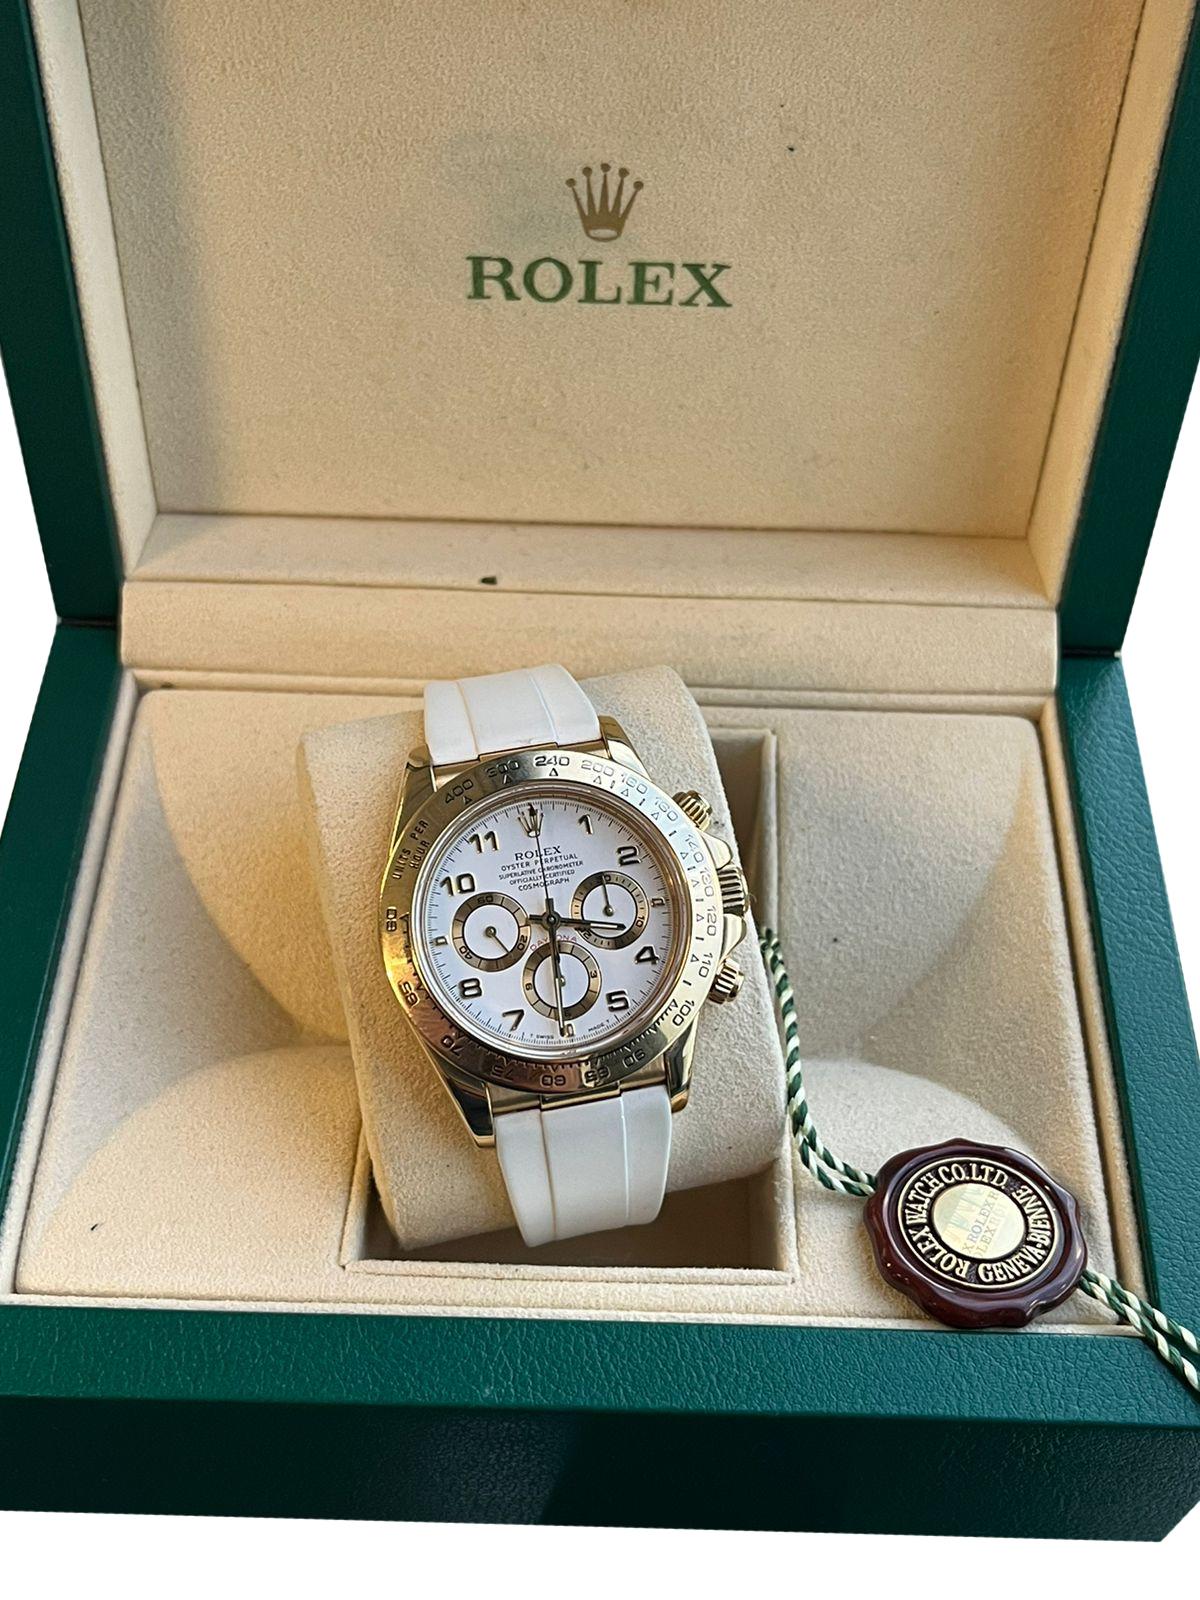 Rolex Daytona Cosmograph 18kt Yellow Gold Bezel White Stap Watch 16518 In Good Condition For Sale In Aventura, FL